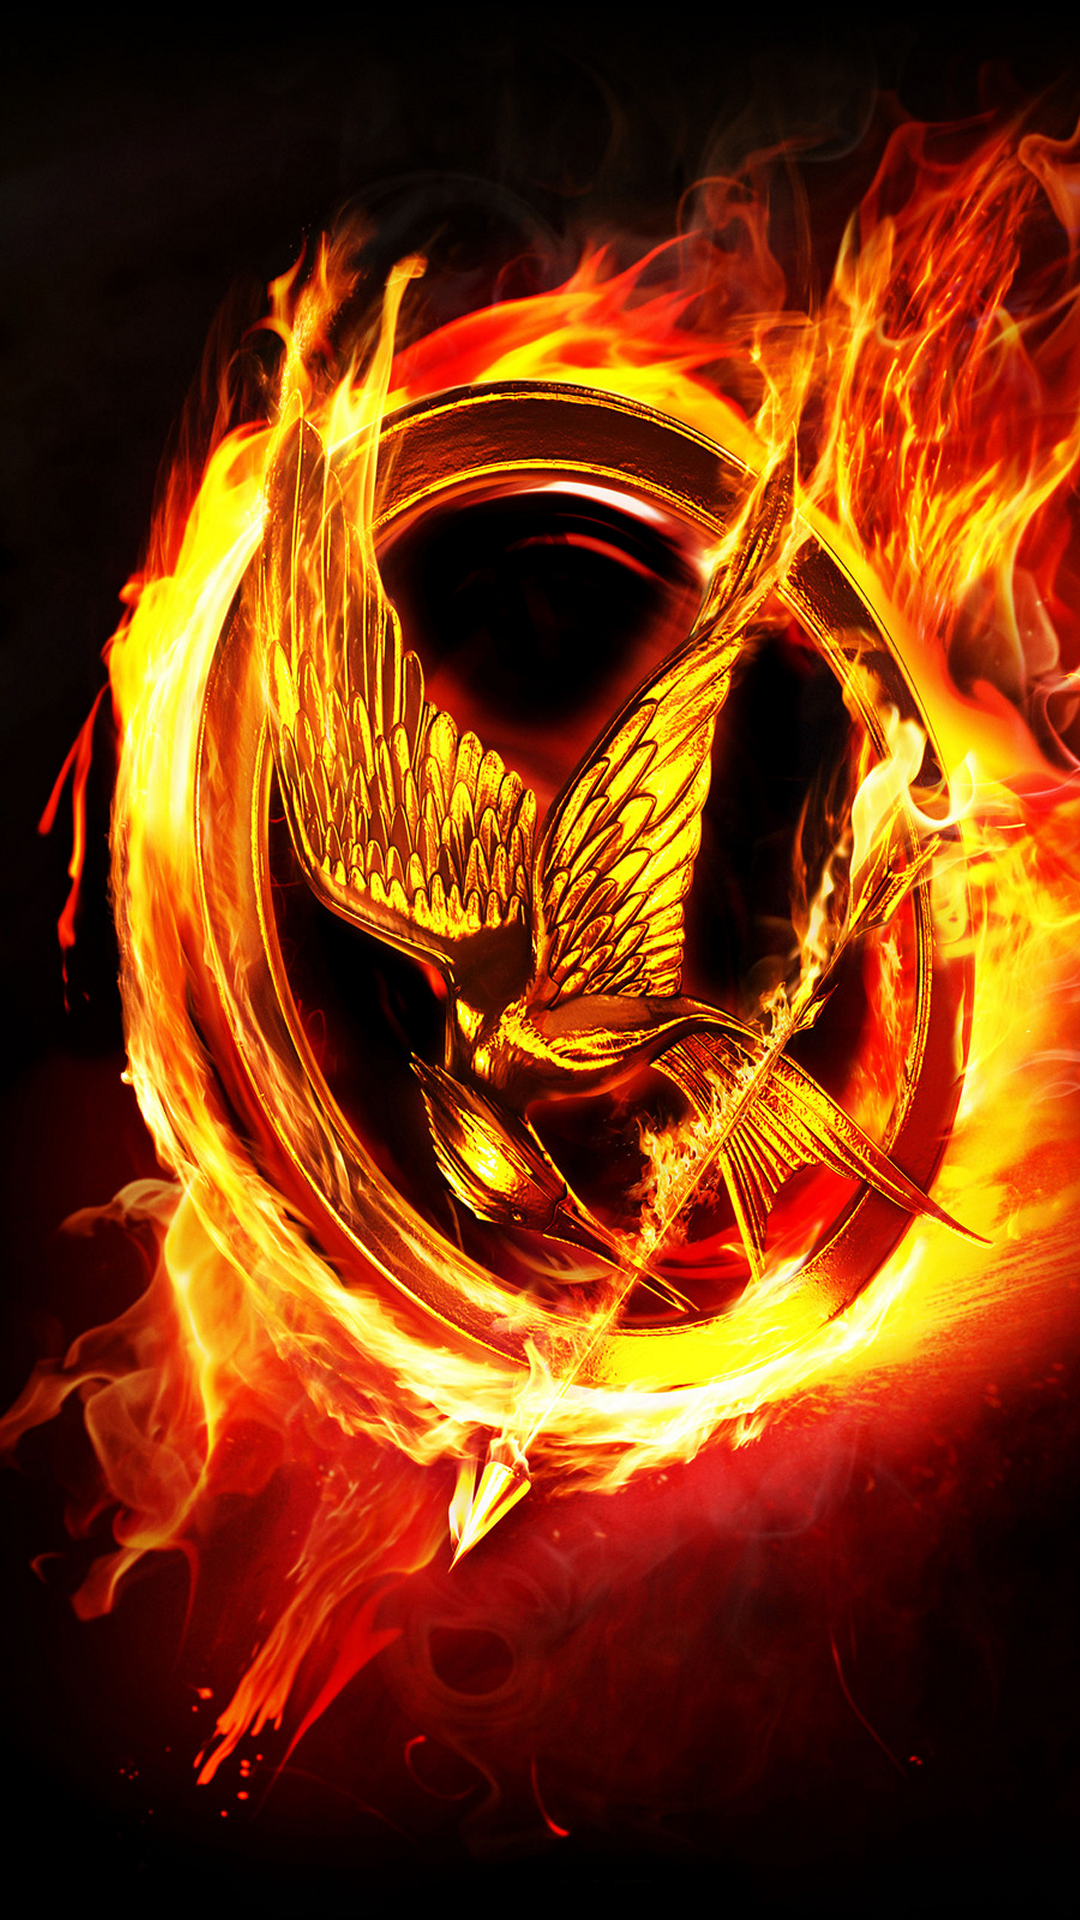 Mockingjay, The Hunger Games, Entertainment Backgrounds, wallpapers for Samsung Galaxy S4, fondos galaxy s4, fondos de pantalla galaxy s4, sfondi samsung galaxy s4, hintergrund hd 1080x1920